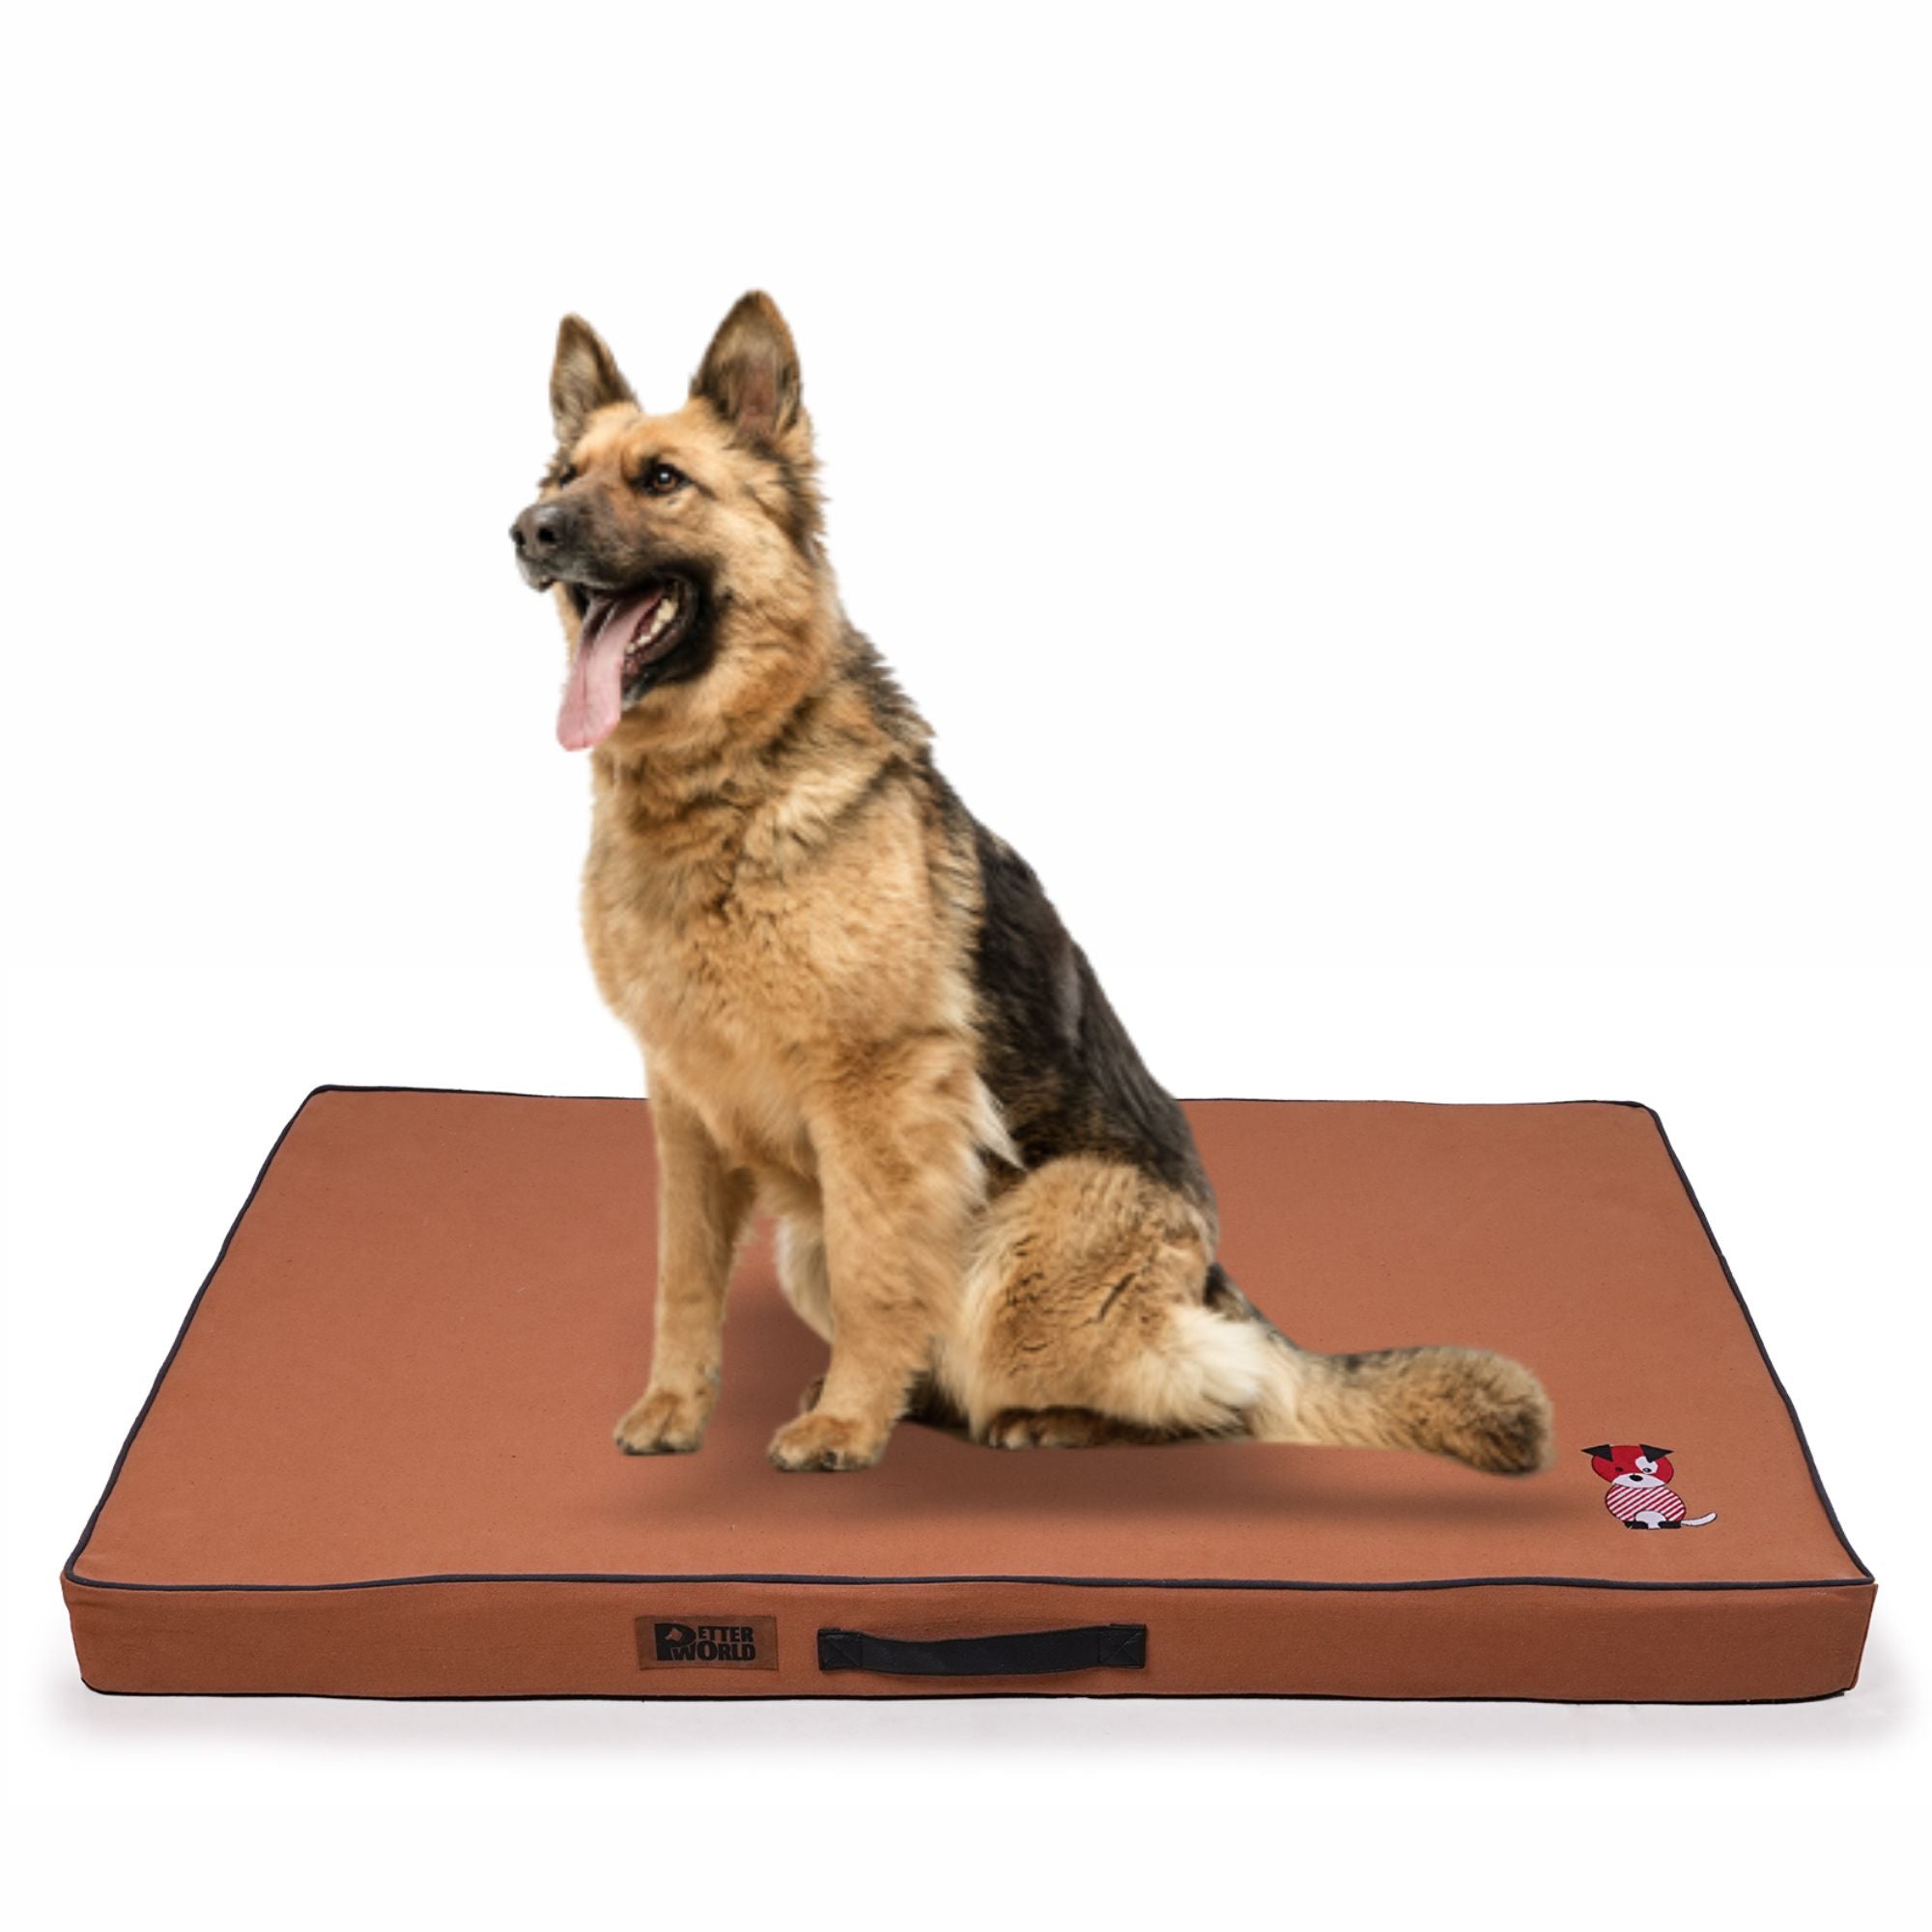 Petter World Comfort Flat Foam Bed for Dogs (Earthy Brown)